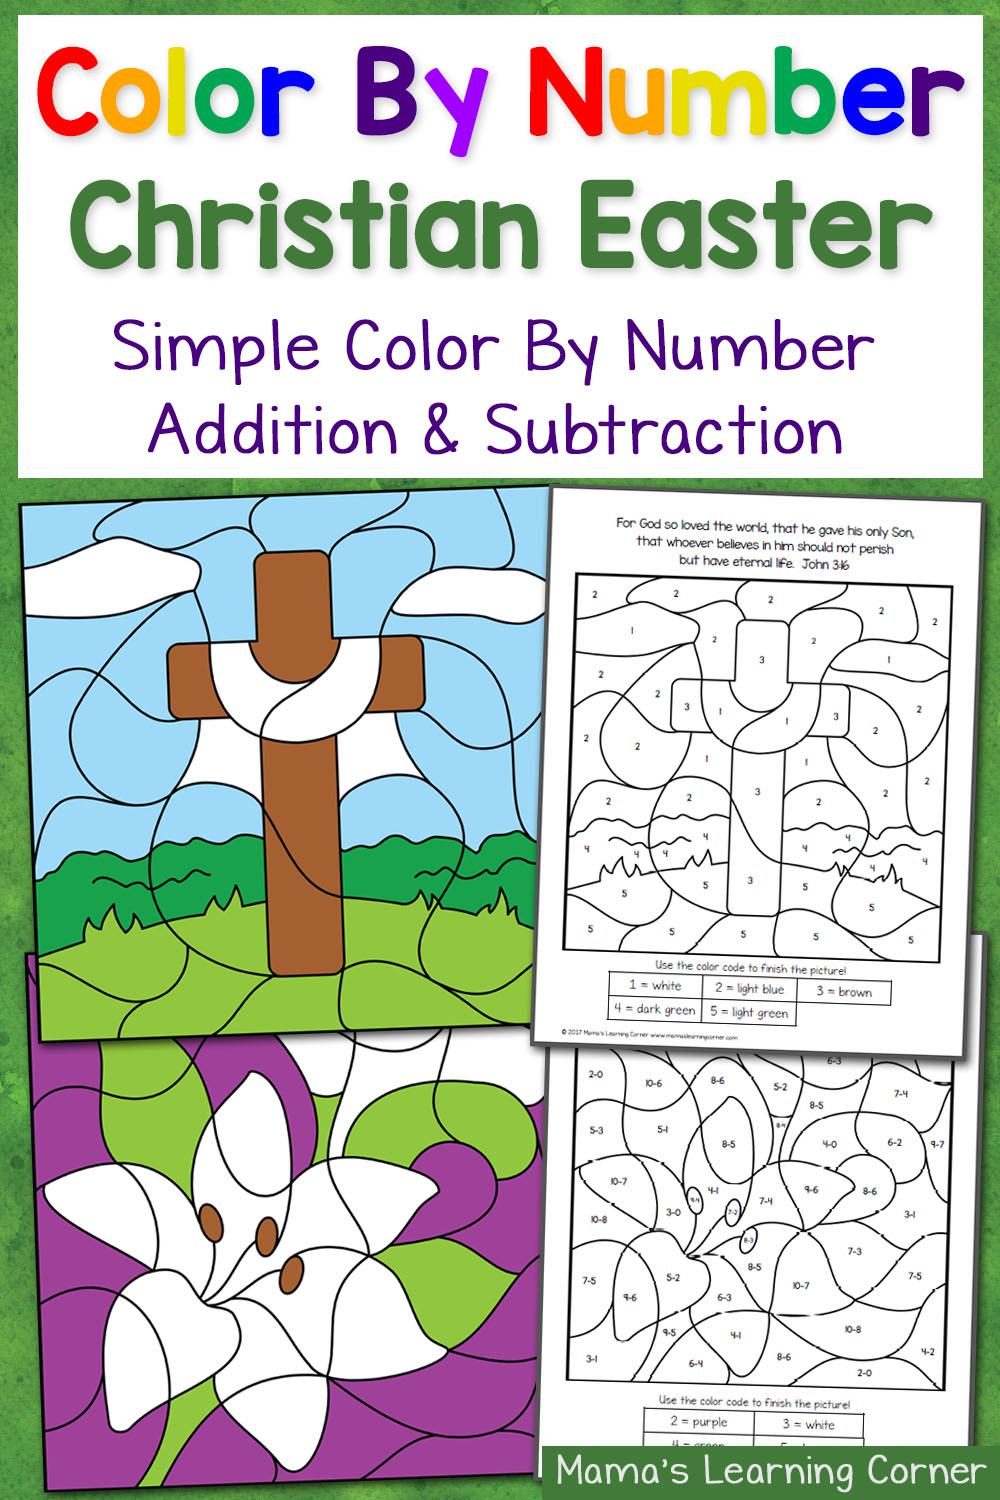 christian-easter-color-by-number-worksheets-mamas-learning-corner